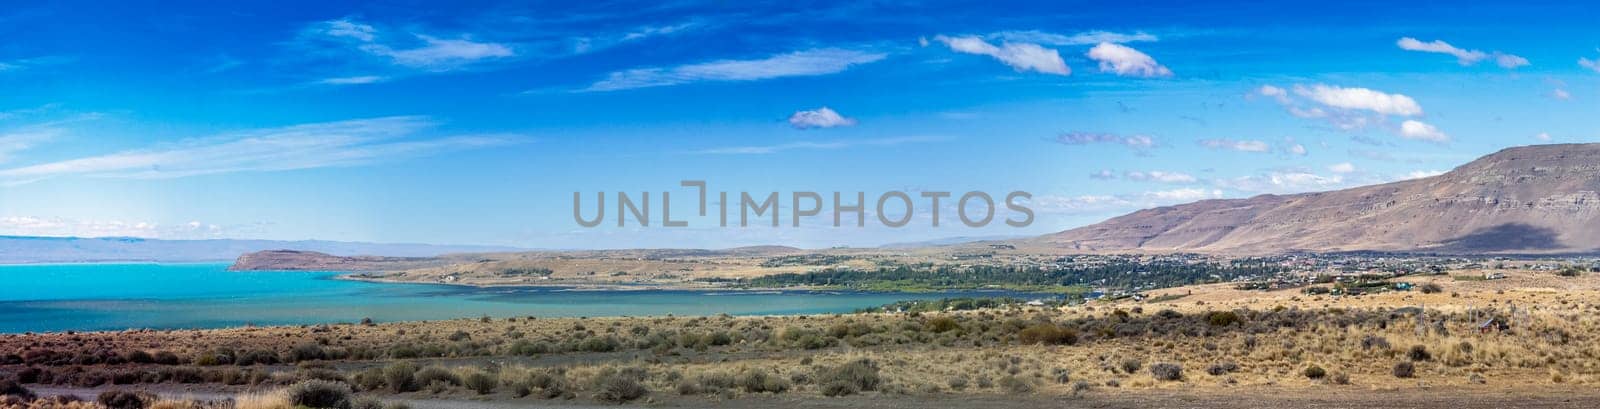 Scenic panoramic of El Calafate, Argentina with blue waters and mountains.